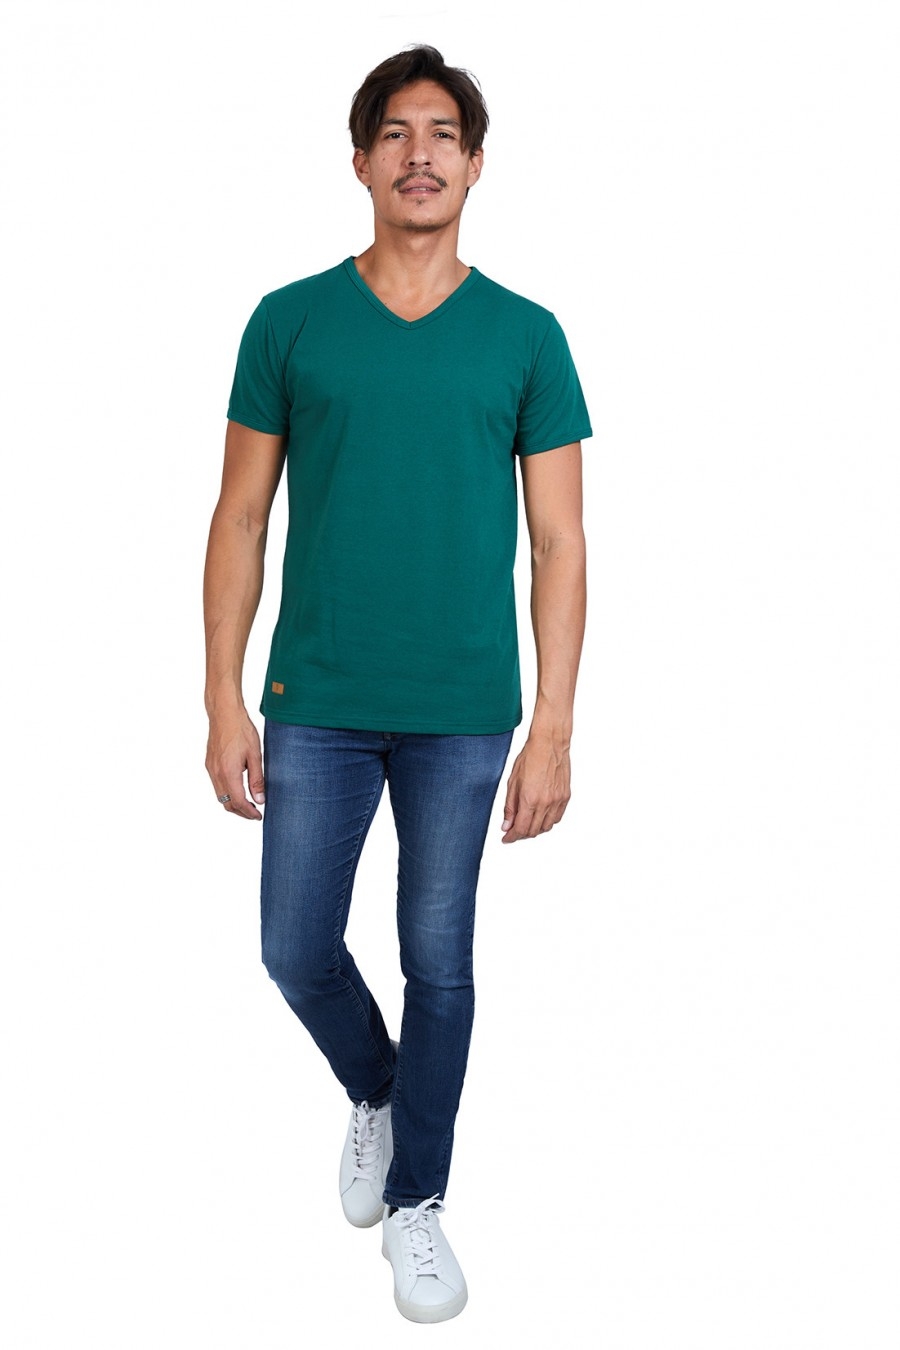 T-SHIRT HOMME MANCHE COURTE COL V VERT BOUTEILLE - Made in France & 100% Recyclé